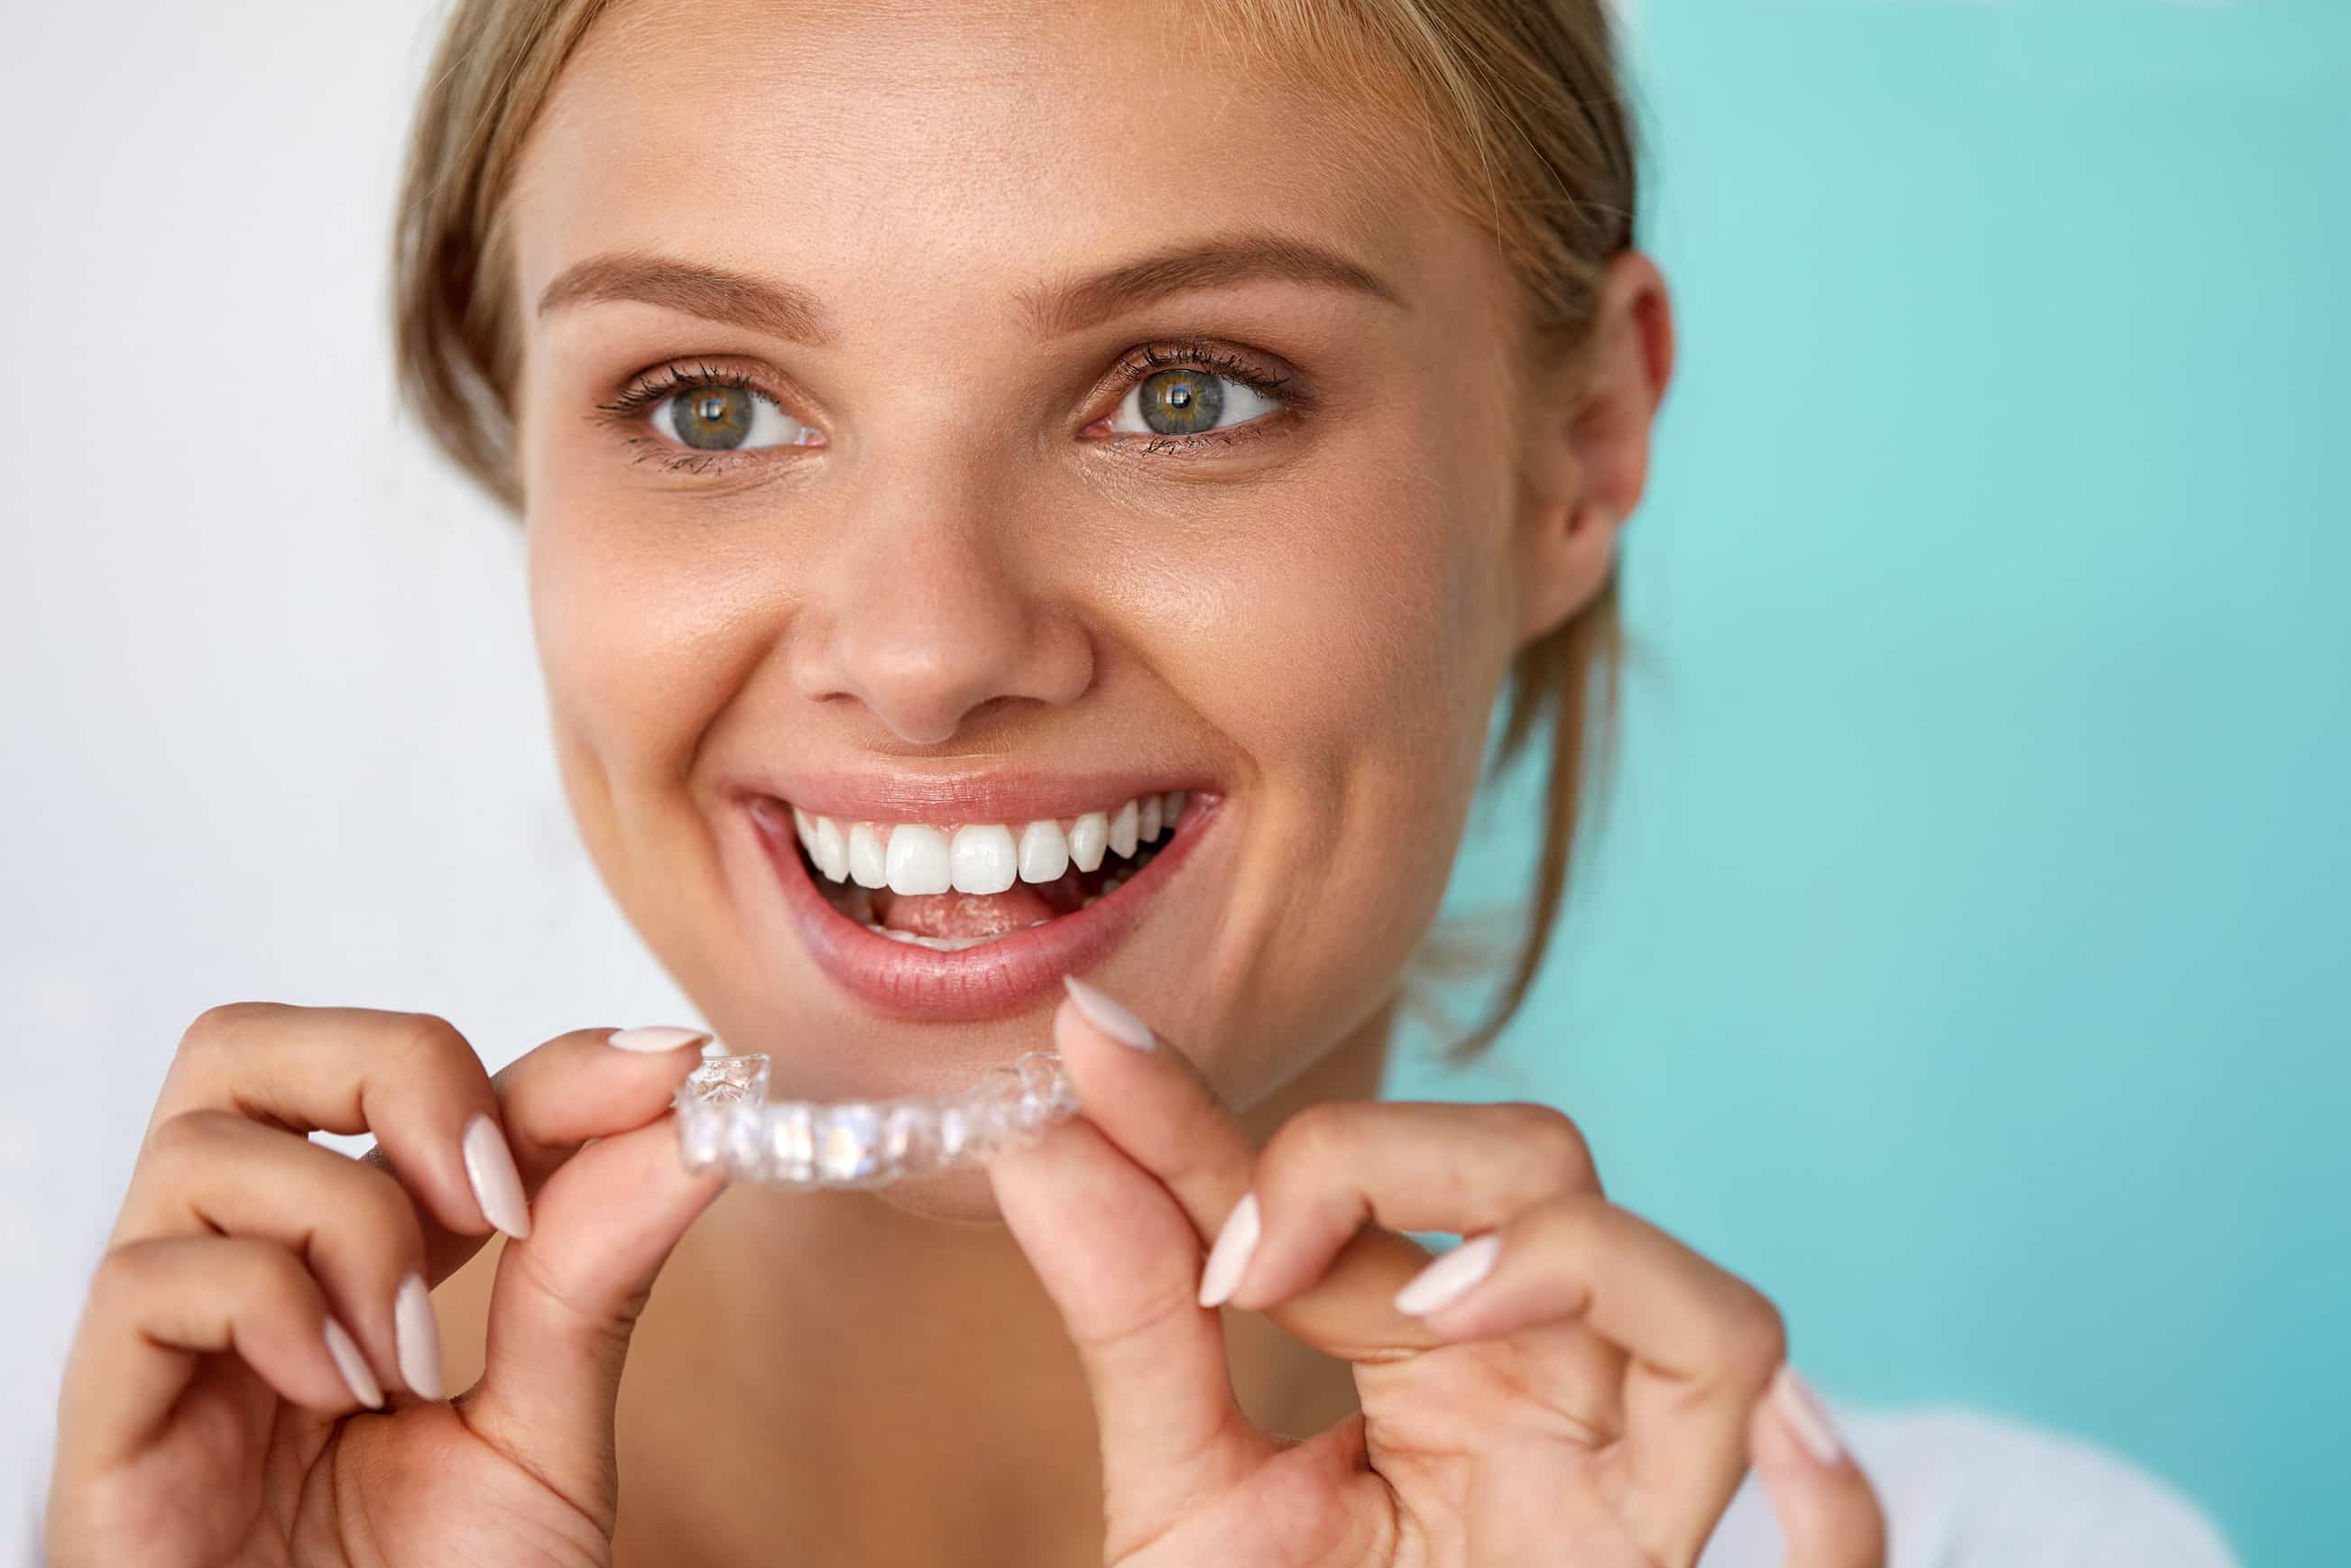 invisible brace options - Northeast Orthodontic Specialists